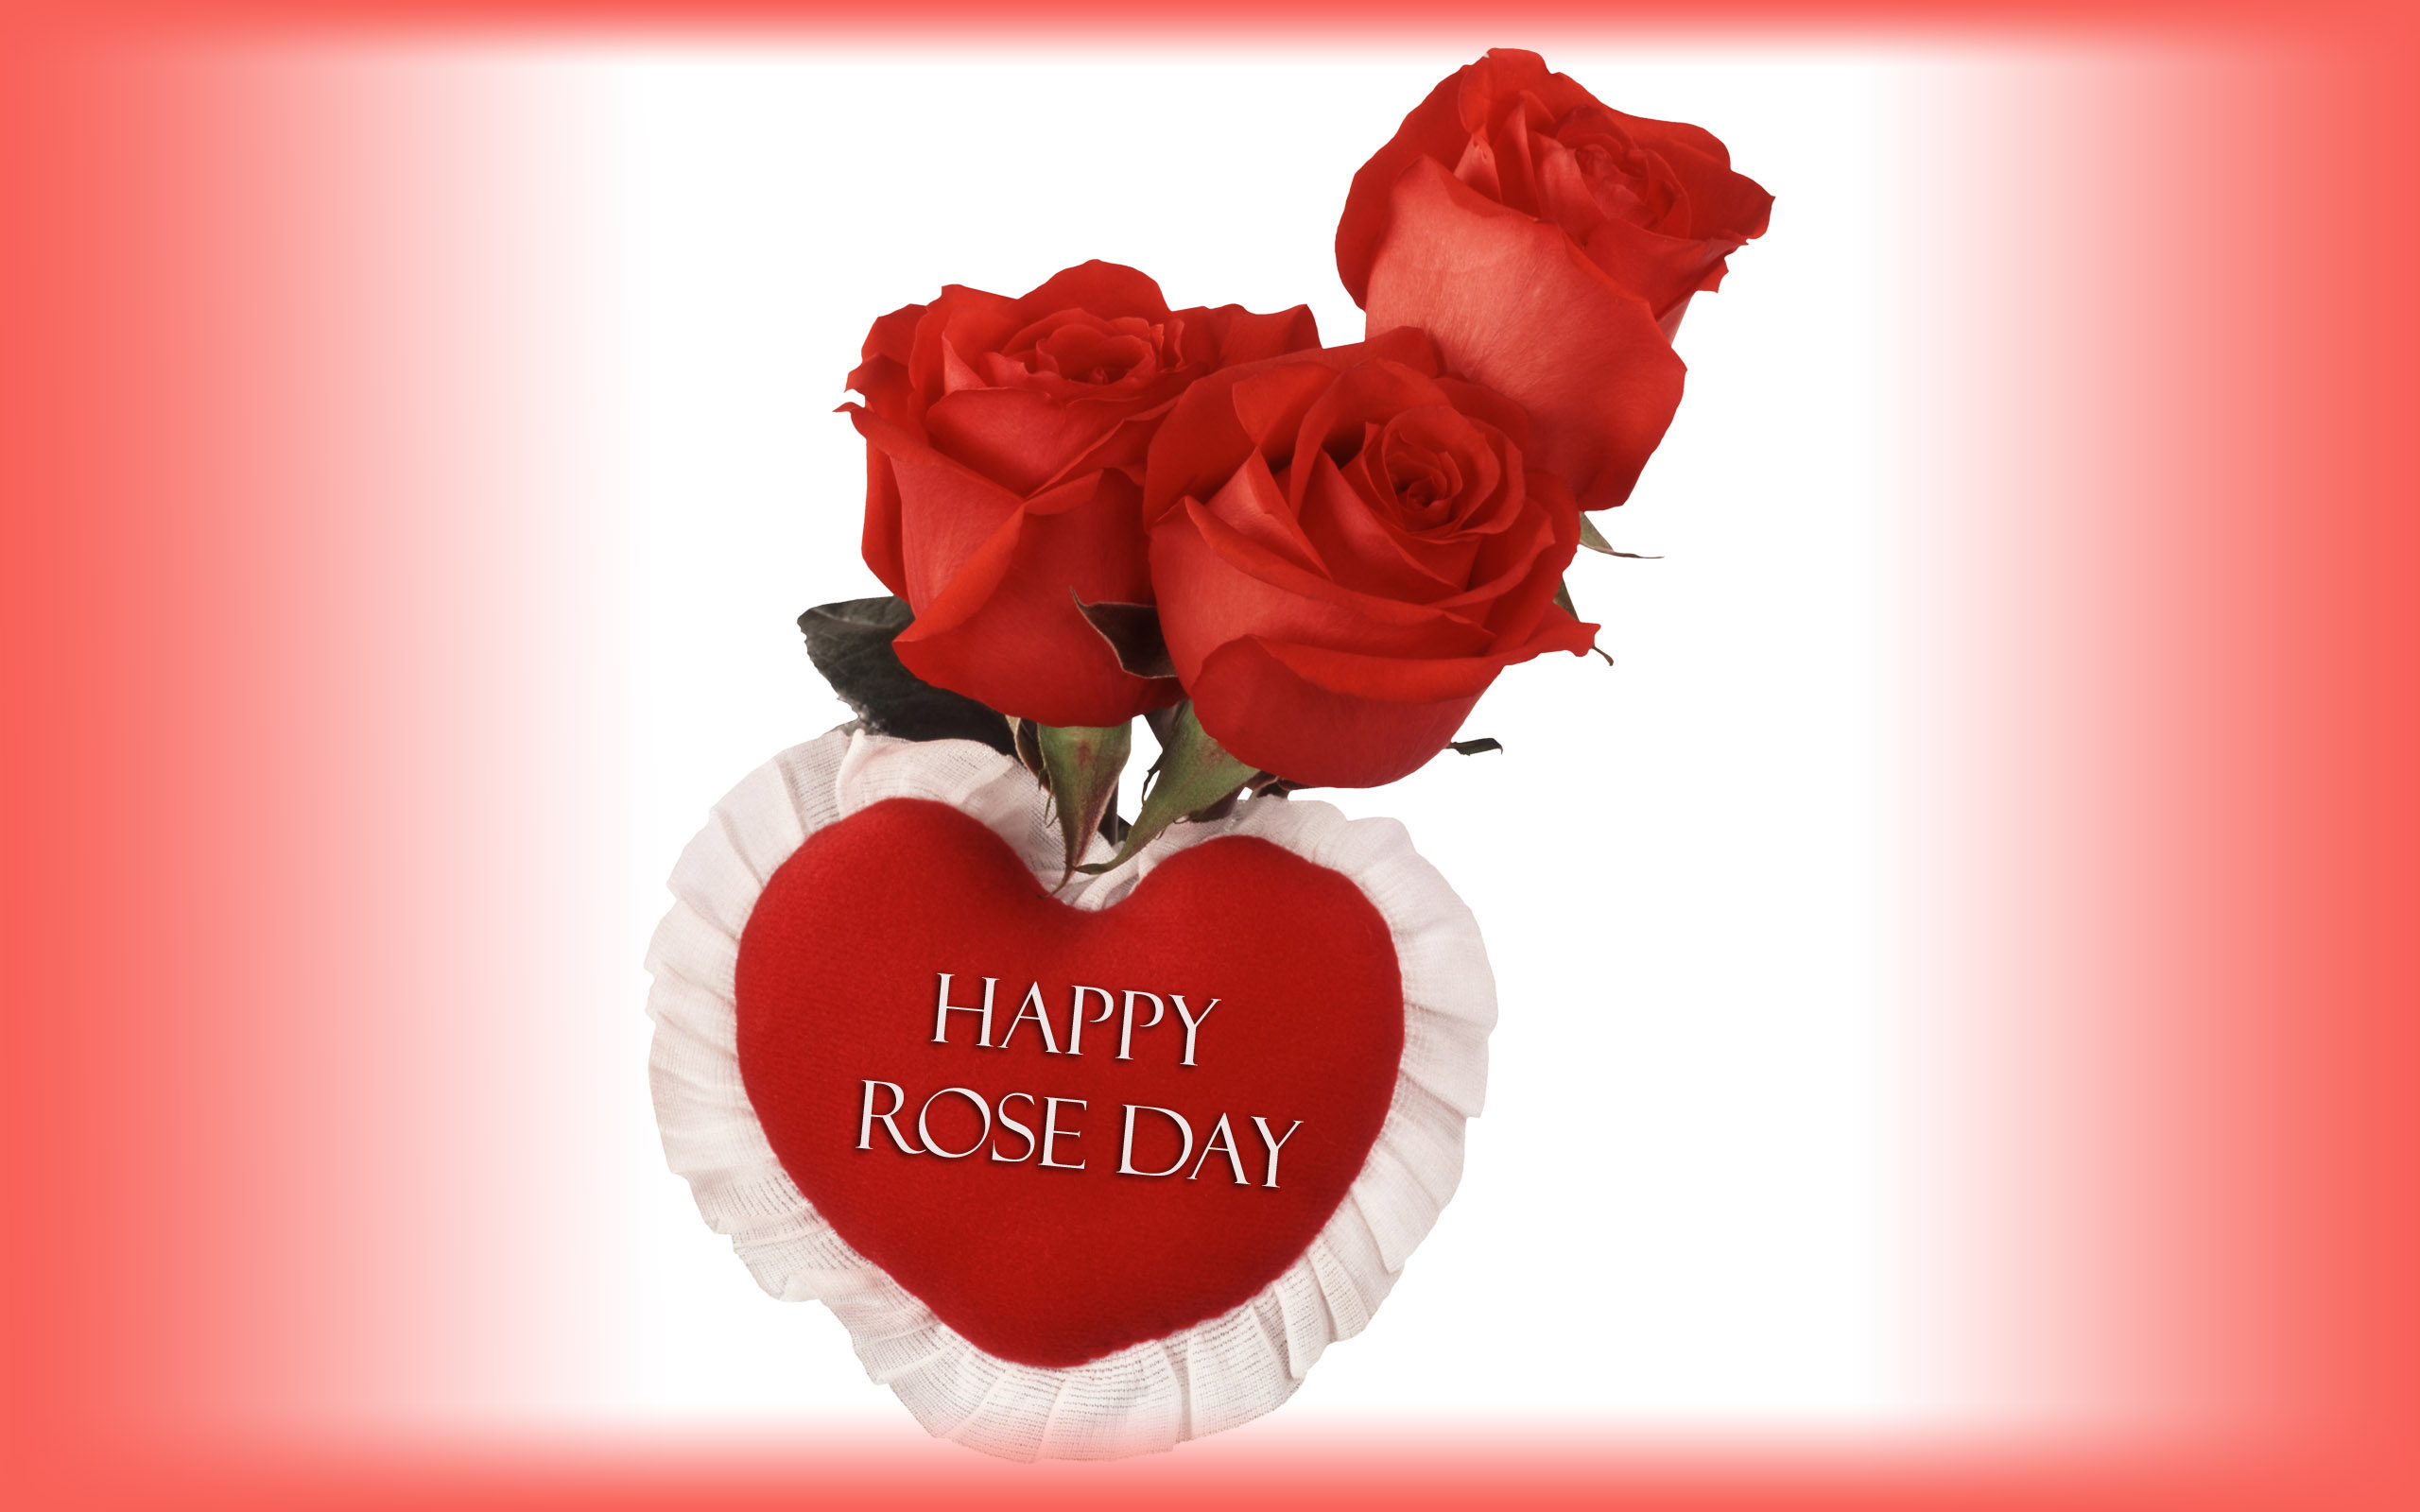 Happy Rose Day Gift Girl Image